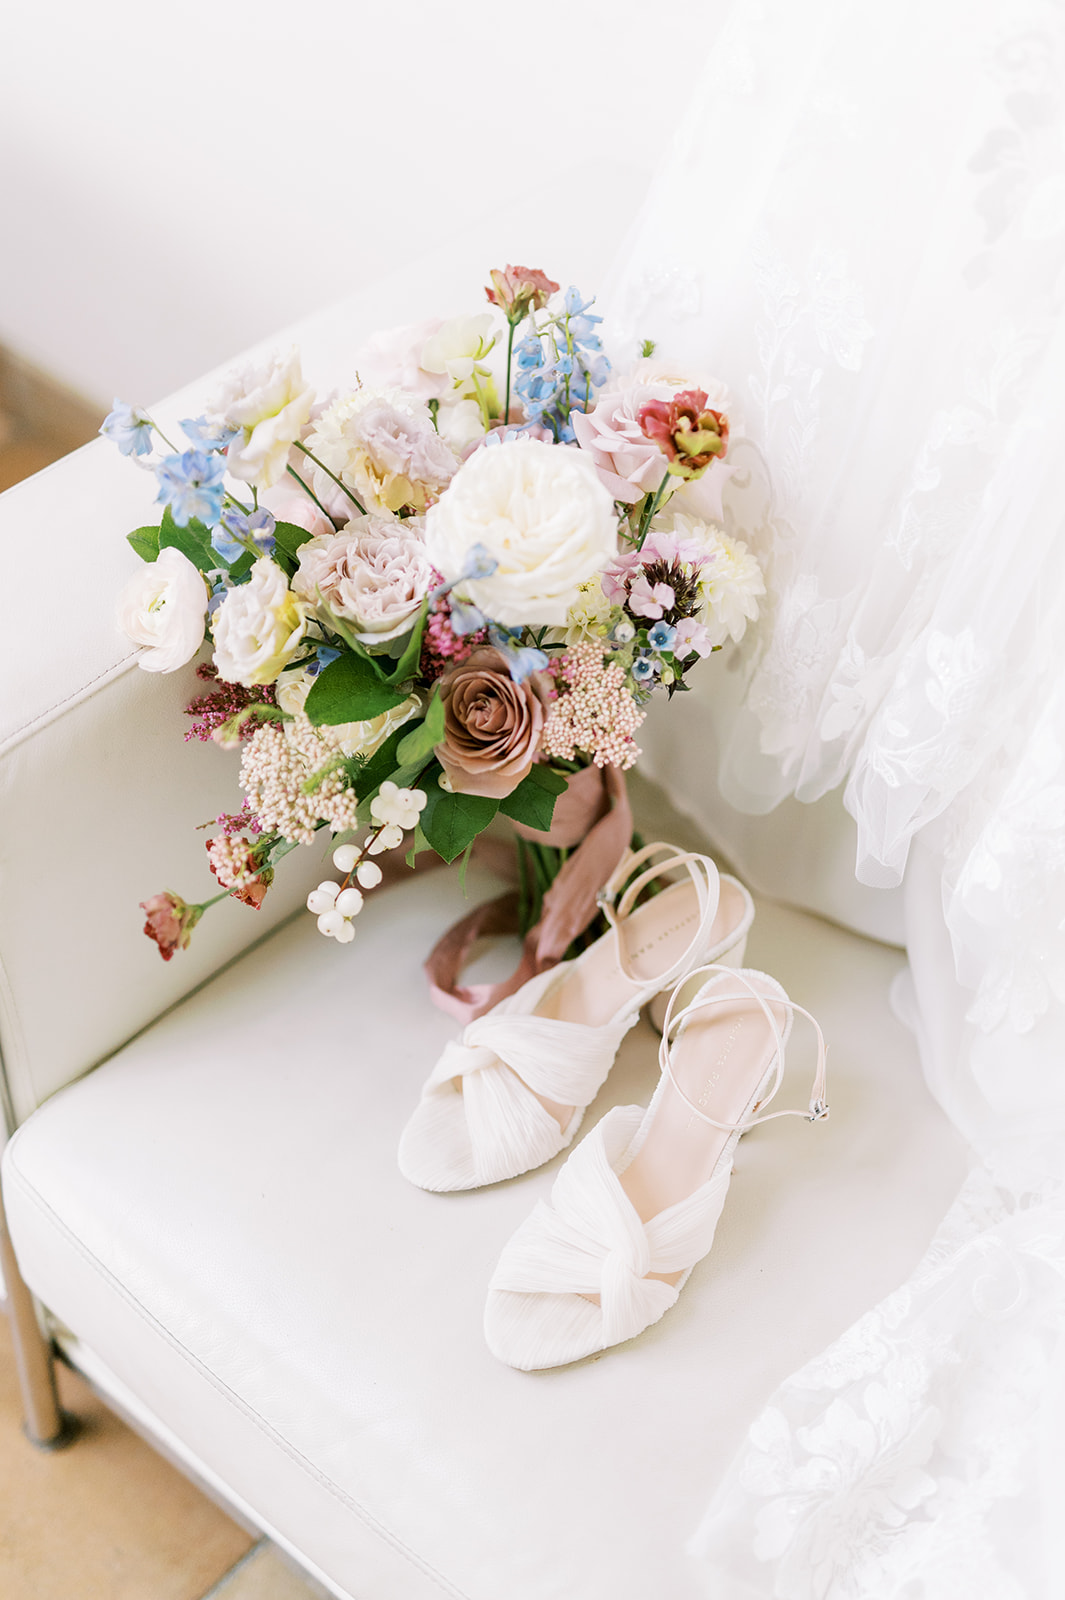 loeffler randall white heels with parisian inspired floral bouquet of white, french blue, and burgundy